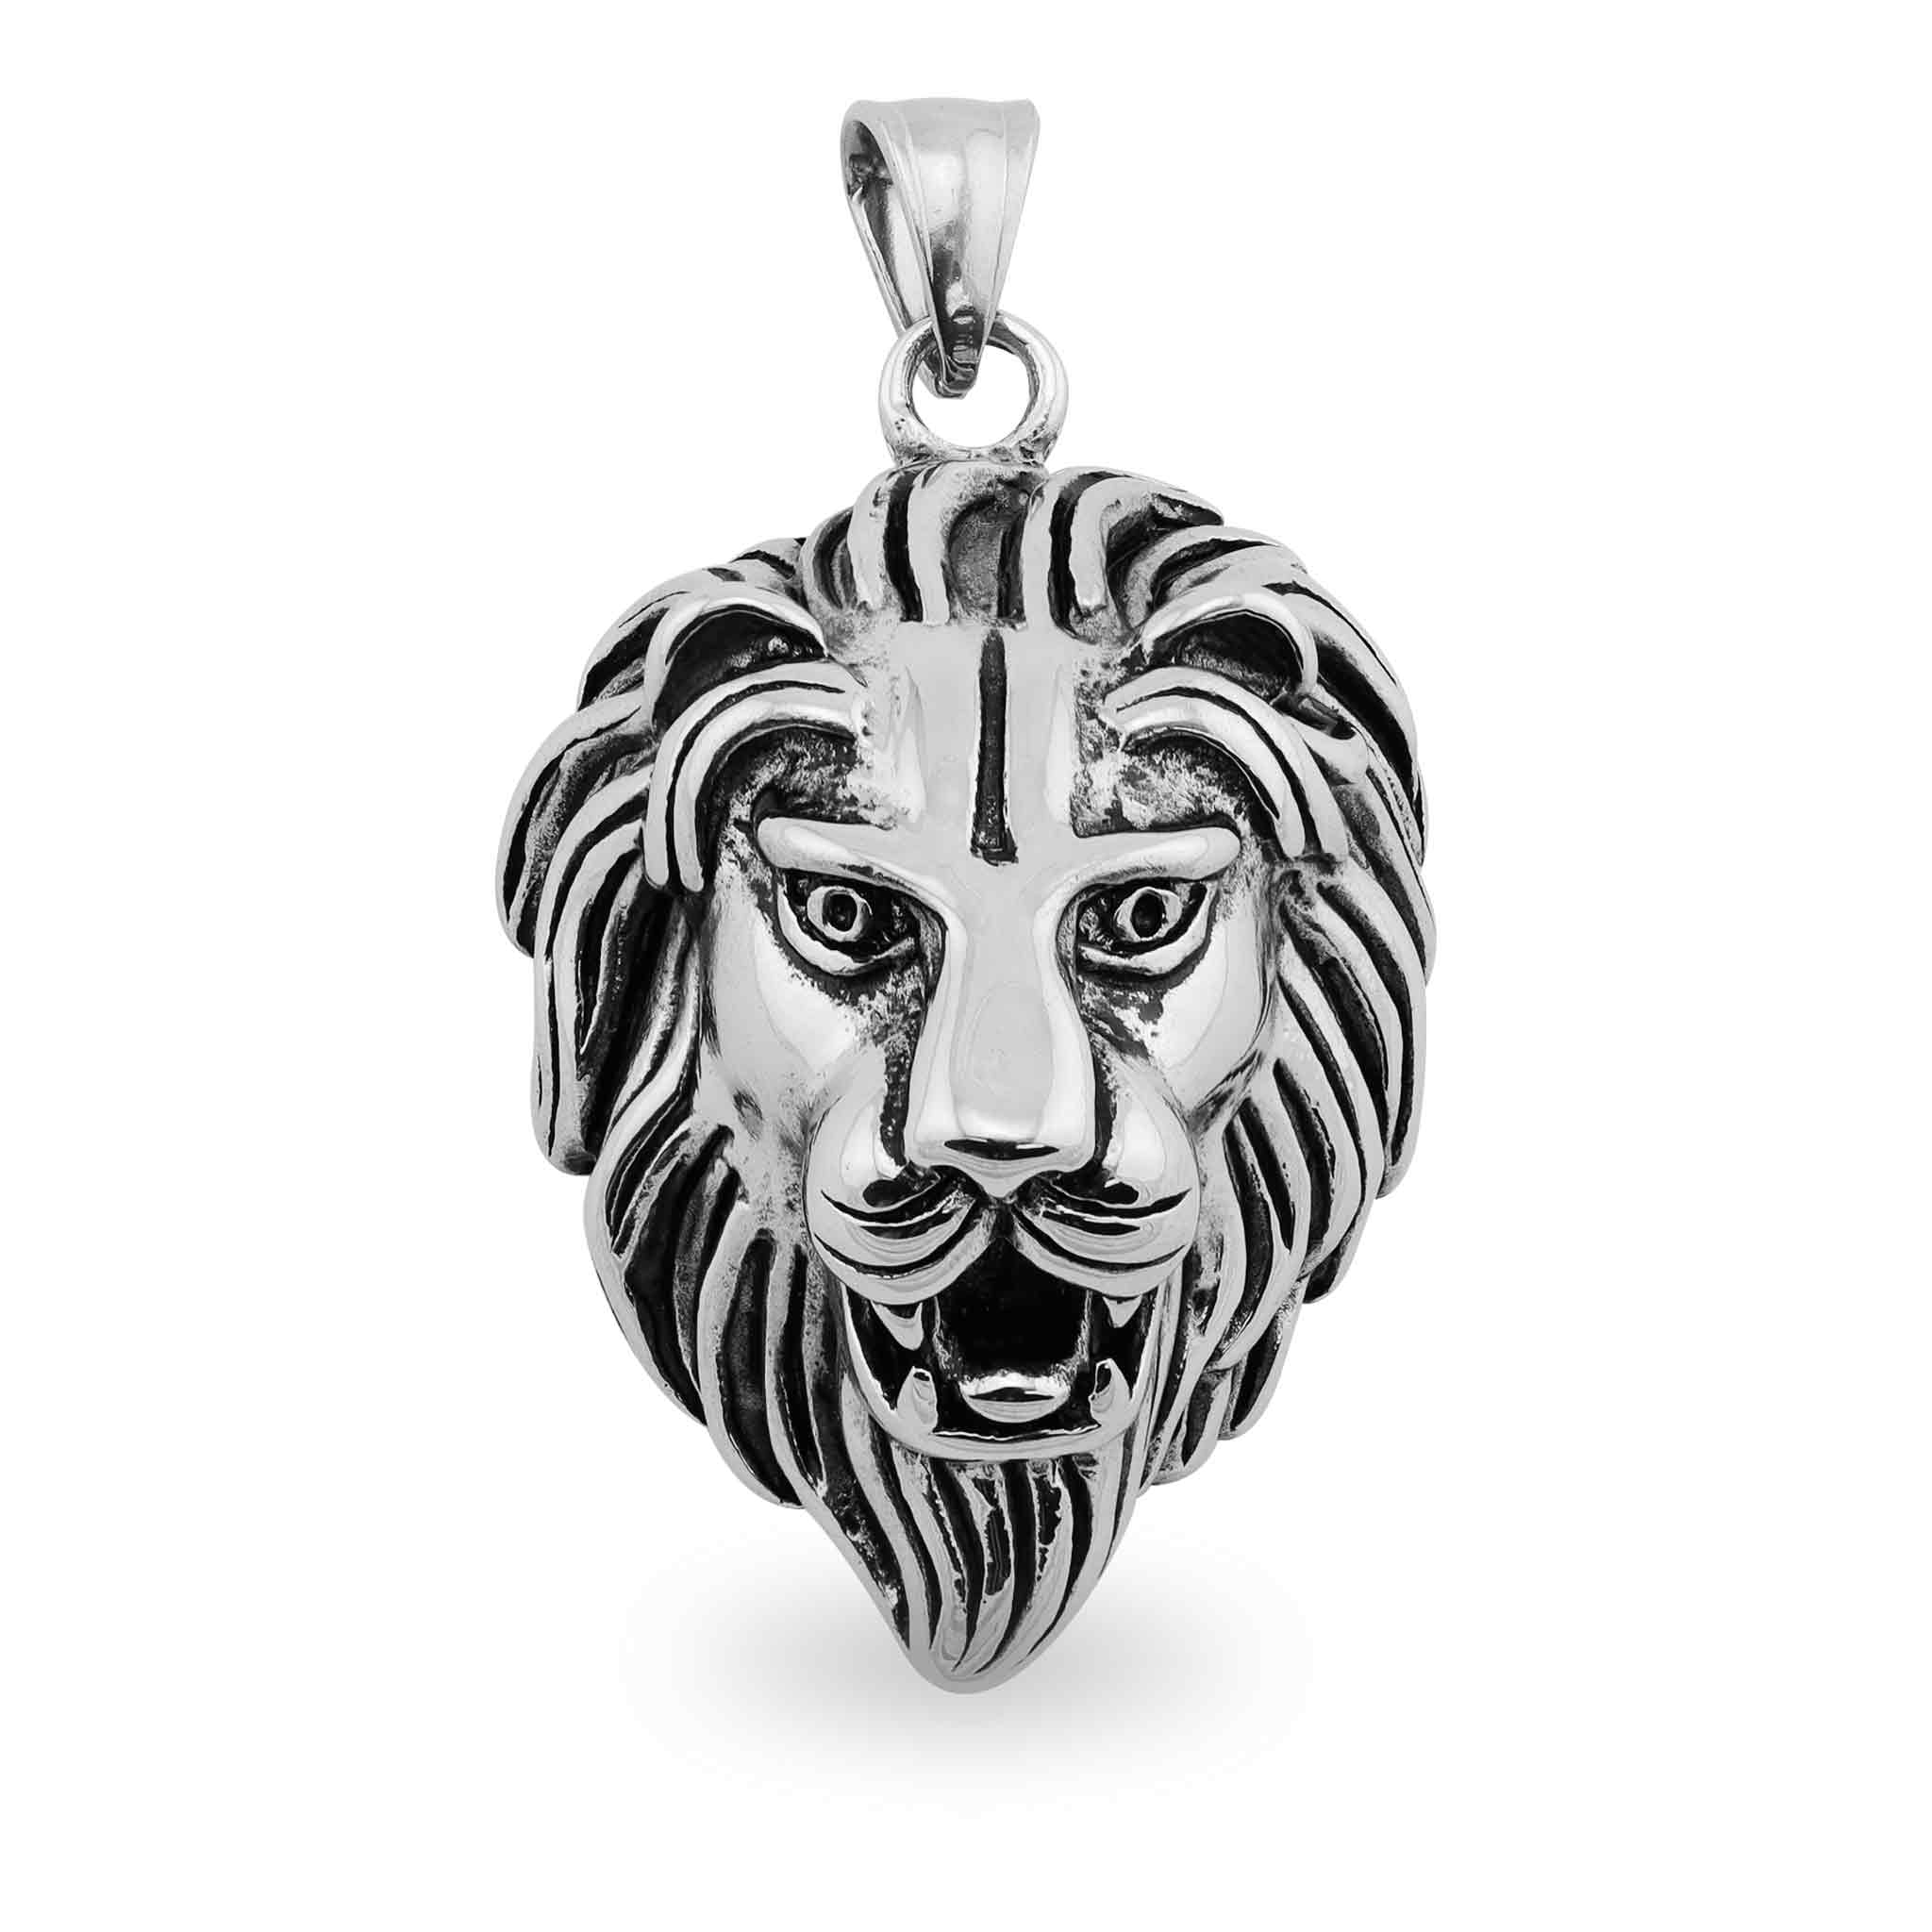 Stainless Steel Roaring Lion Pendant / PDC2004